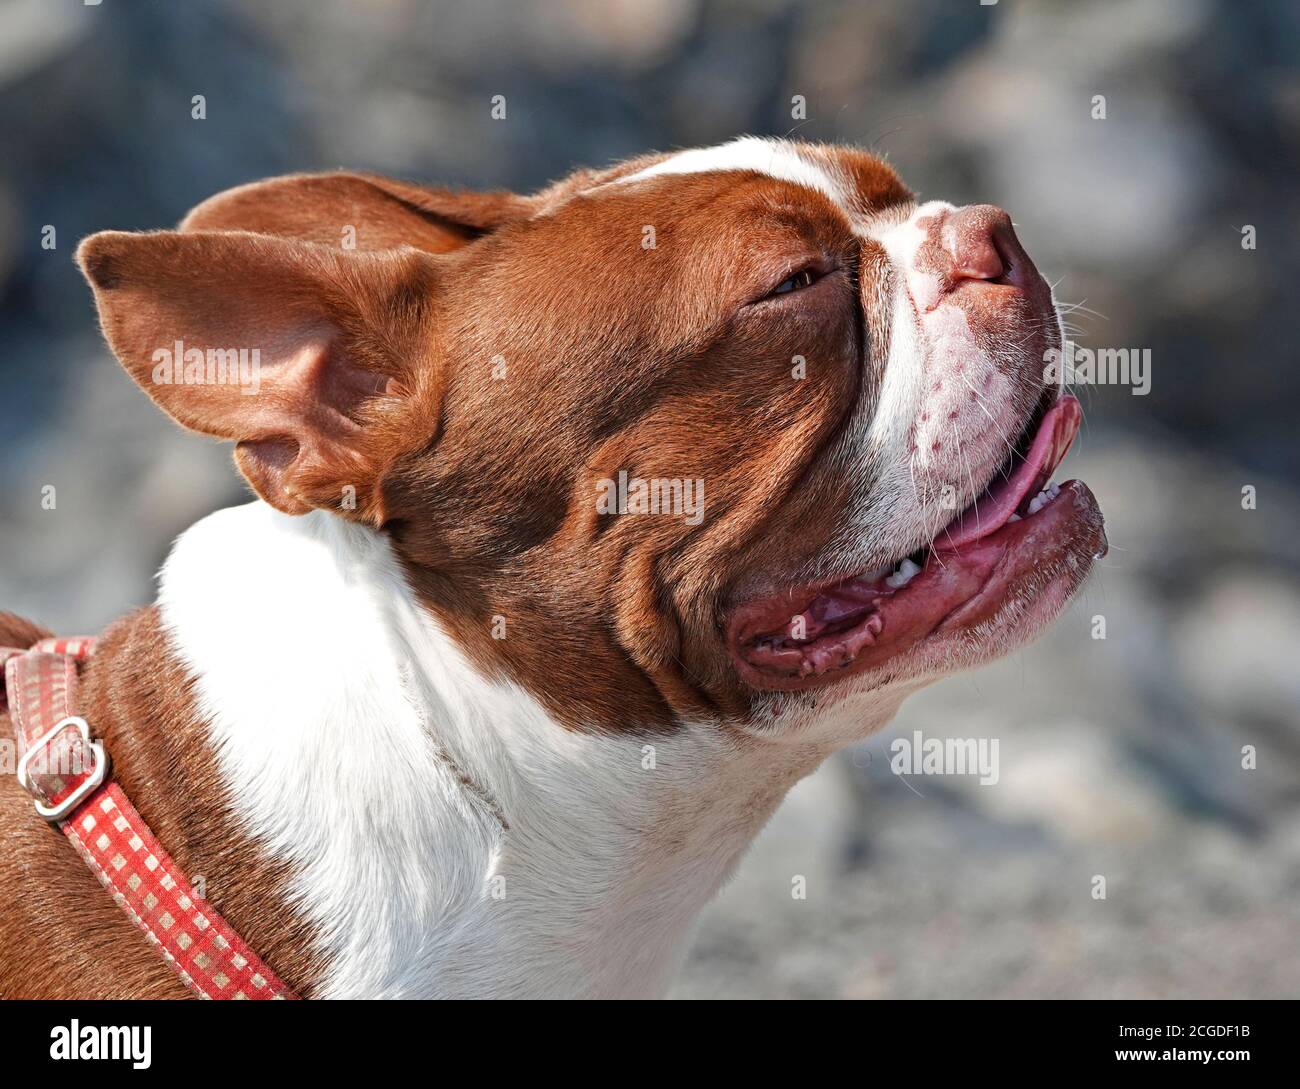 A young Boston Terrier dog accepts a doggy treat from its master on a doggy training walk in central Oregon. Stock Photo